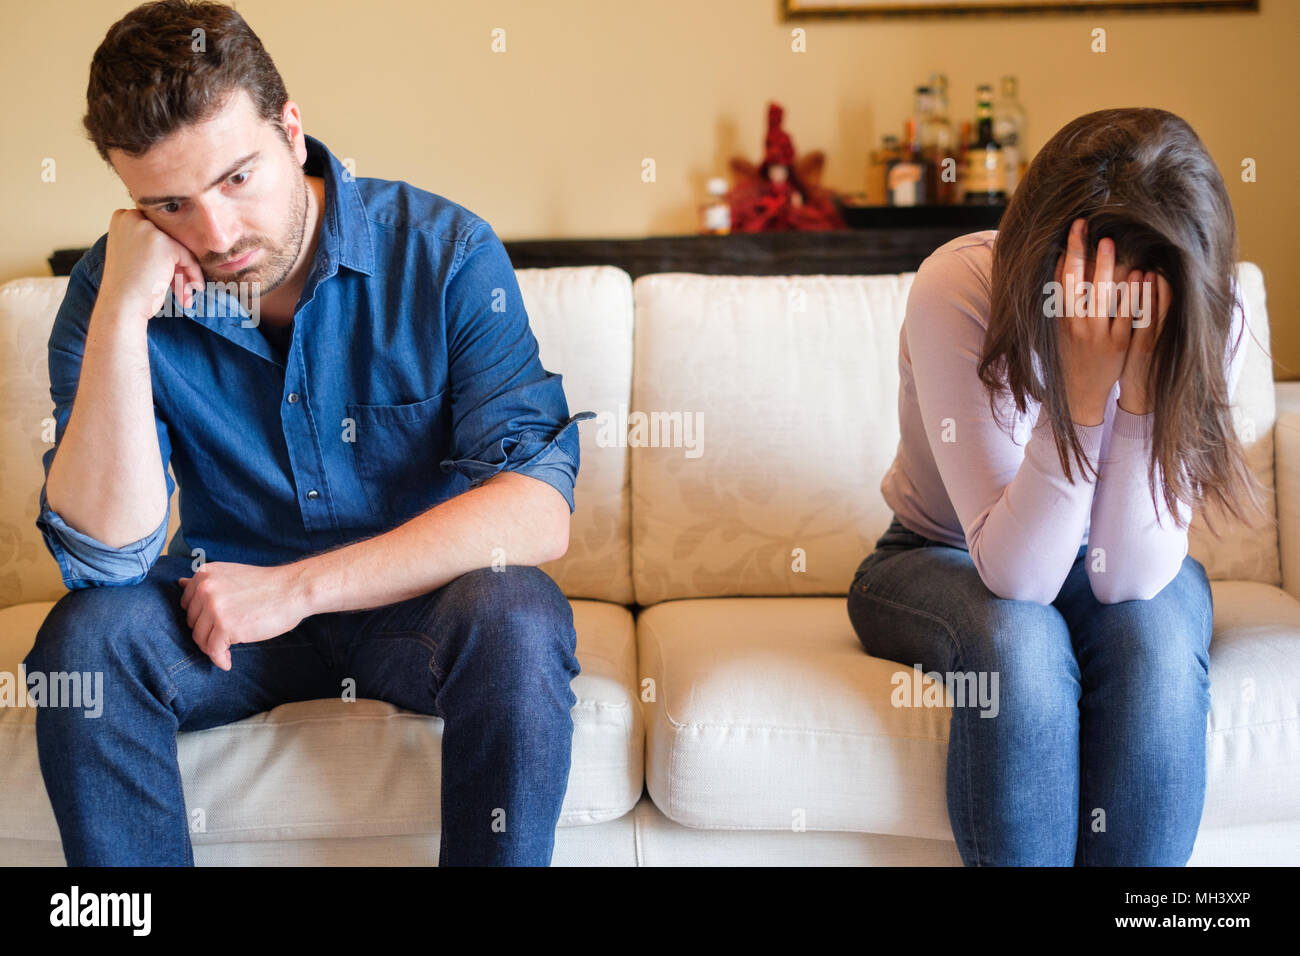 Couple crisis after relationship breakup and boyfriend betrayal and infidelity confession Stock Photo